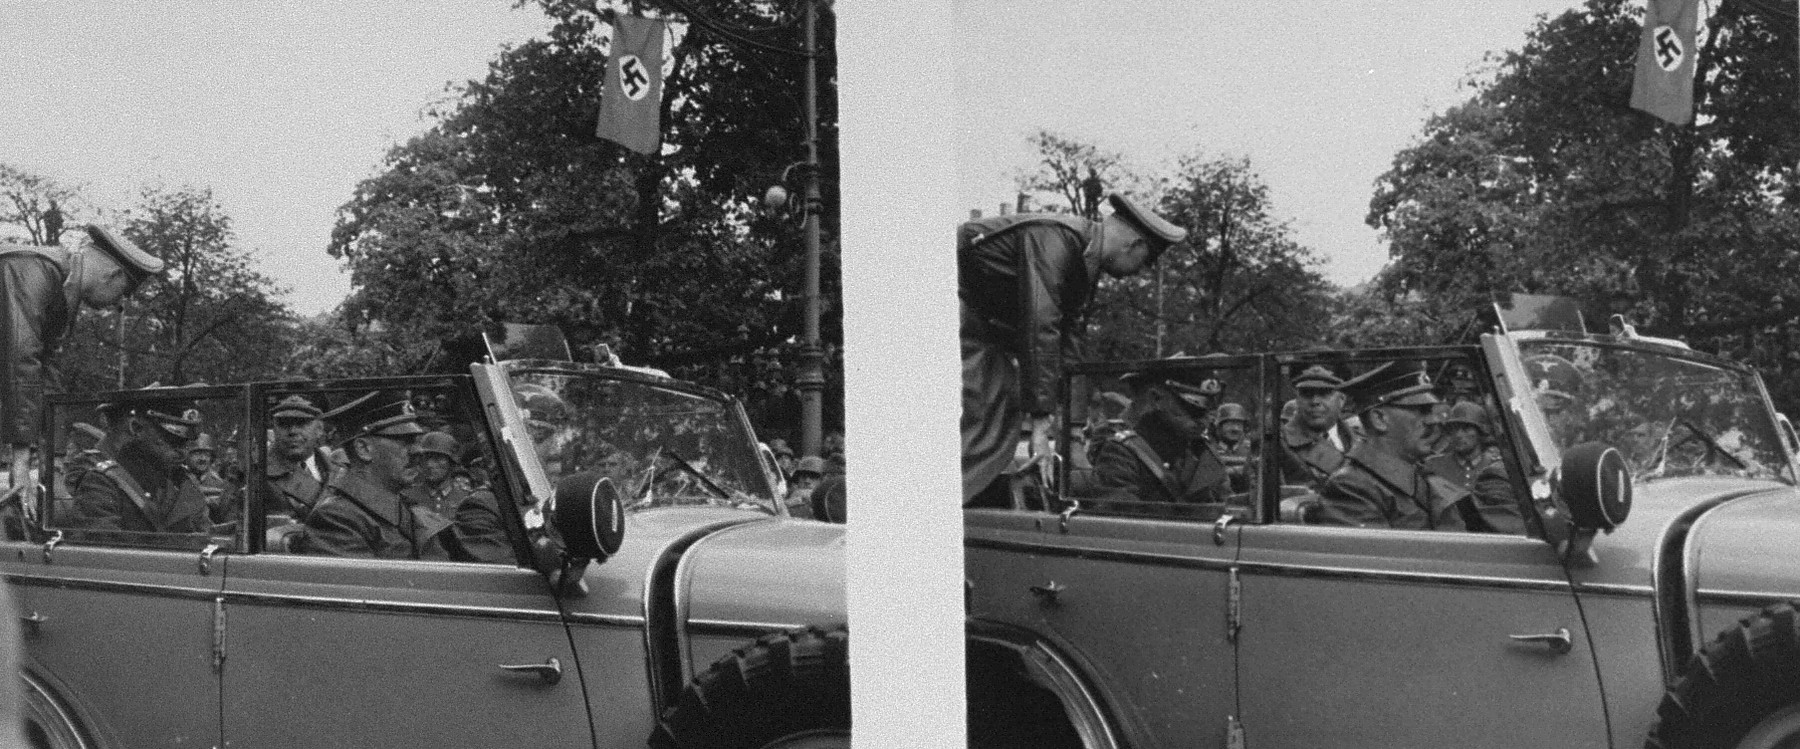 Stereoscopic photograph of Adolf Hitler and other Nazi officials leaving the viewing stand following a victory parade in Warsaw celebrating the German conquest of Poland.